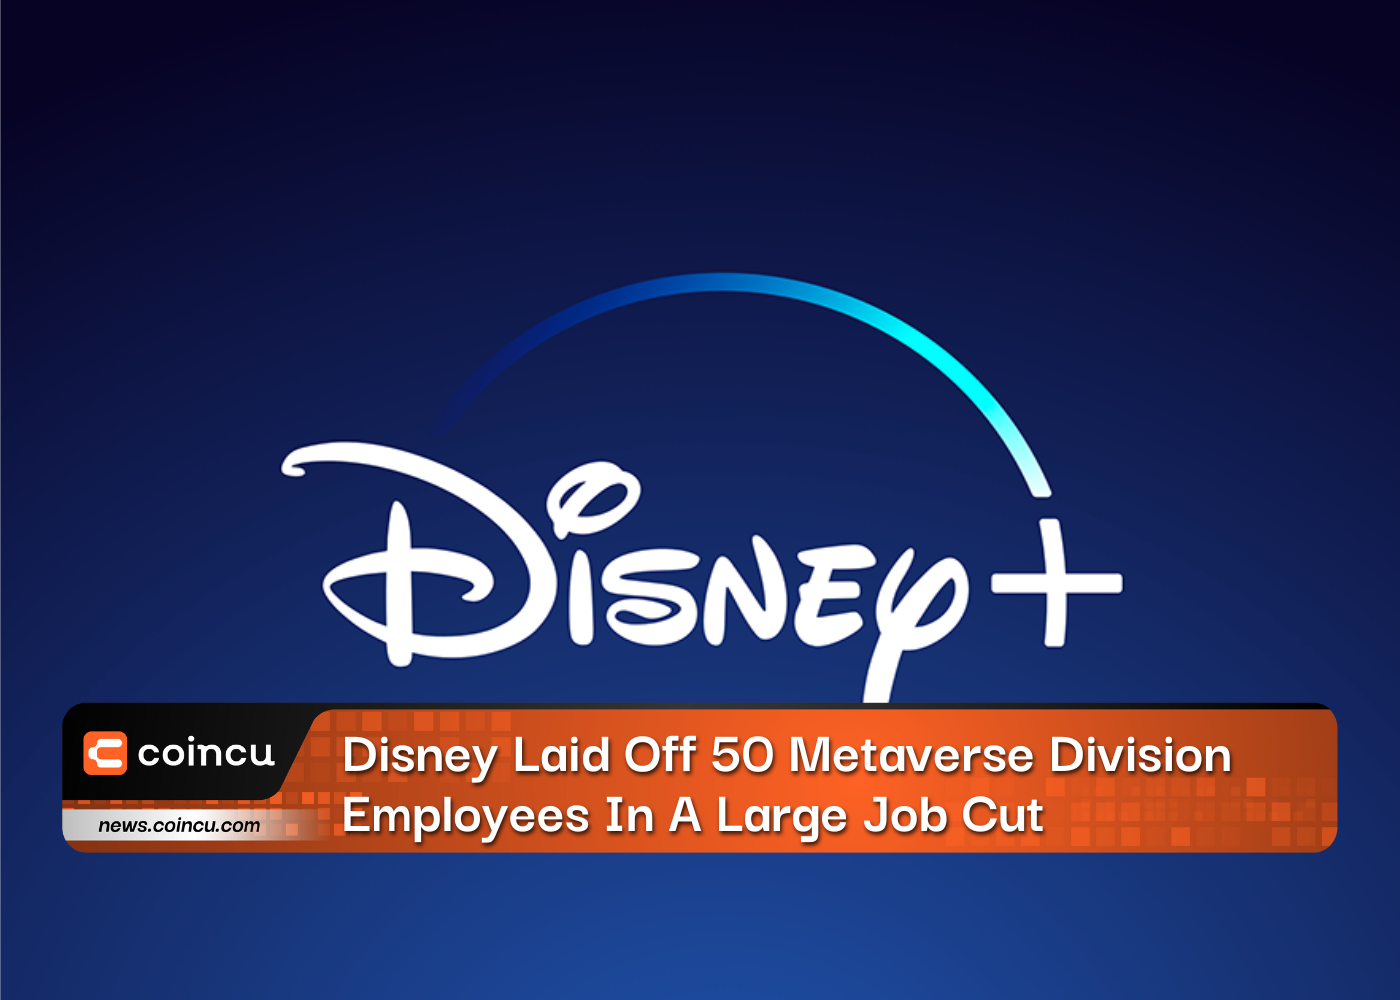 Disney Laid Off 50 Metaverse Division Employees In A Large Job Cut